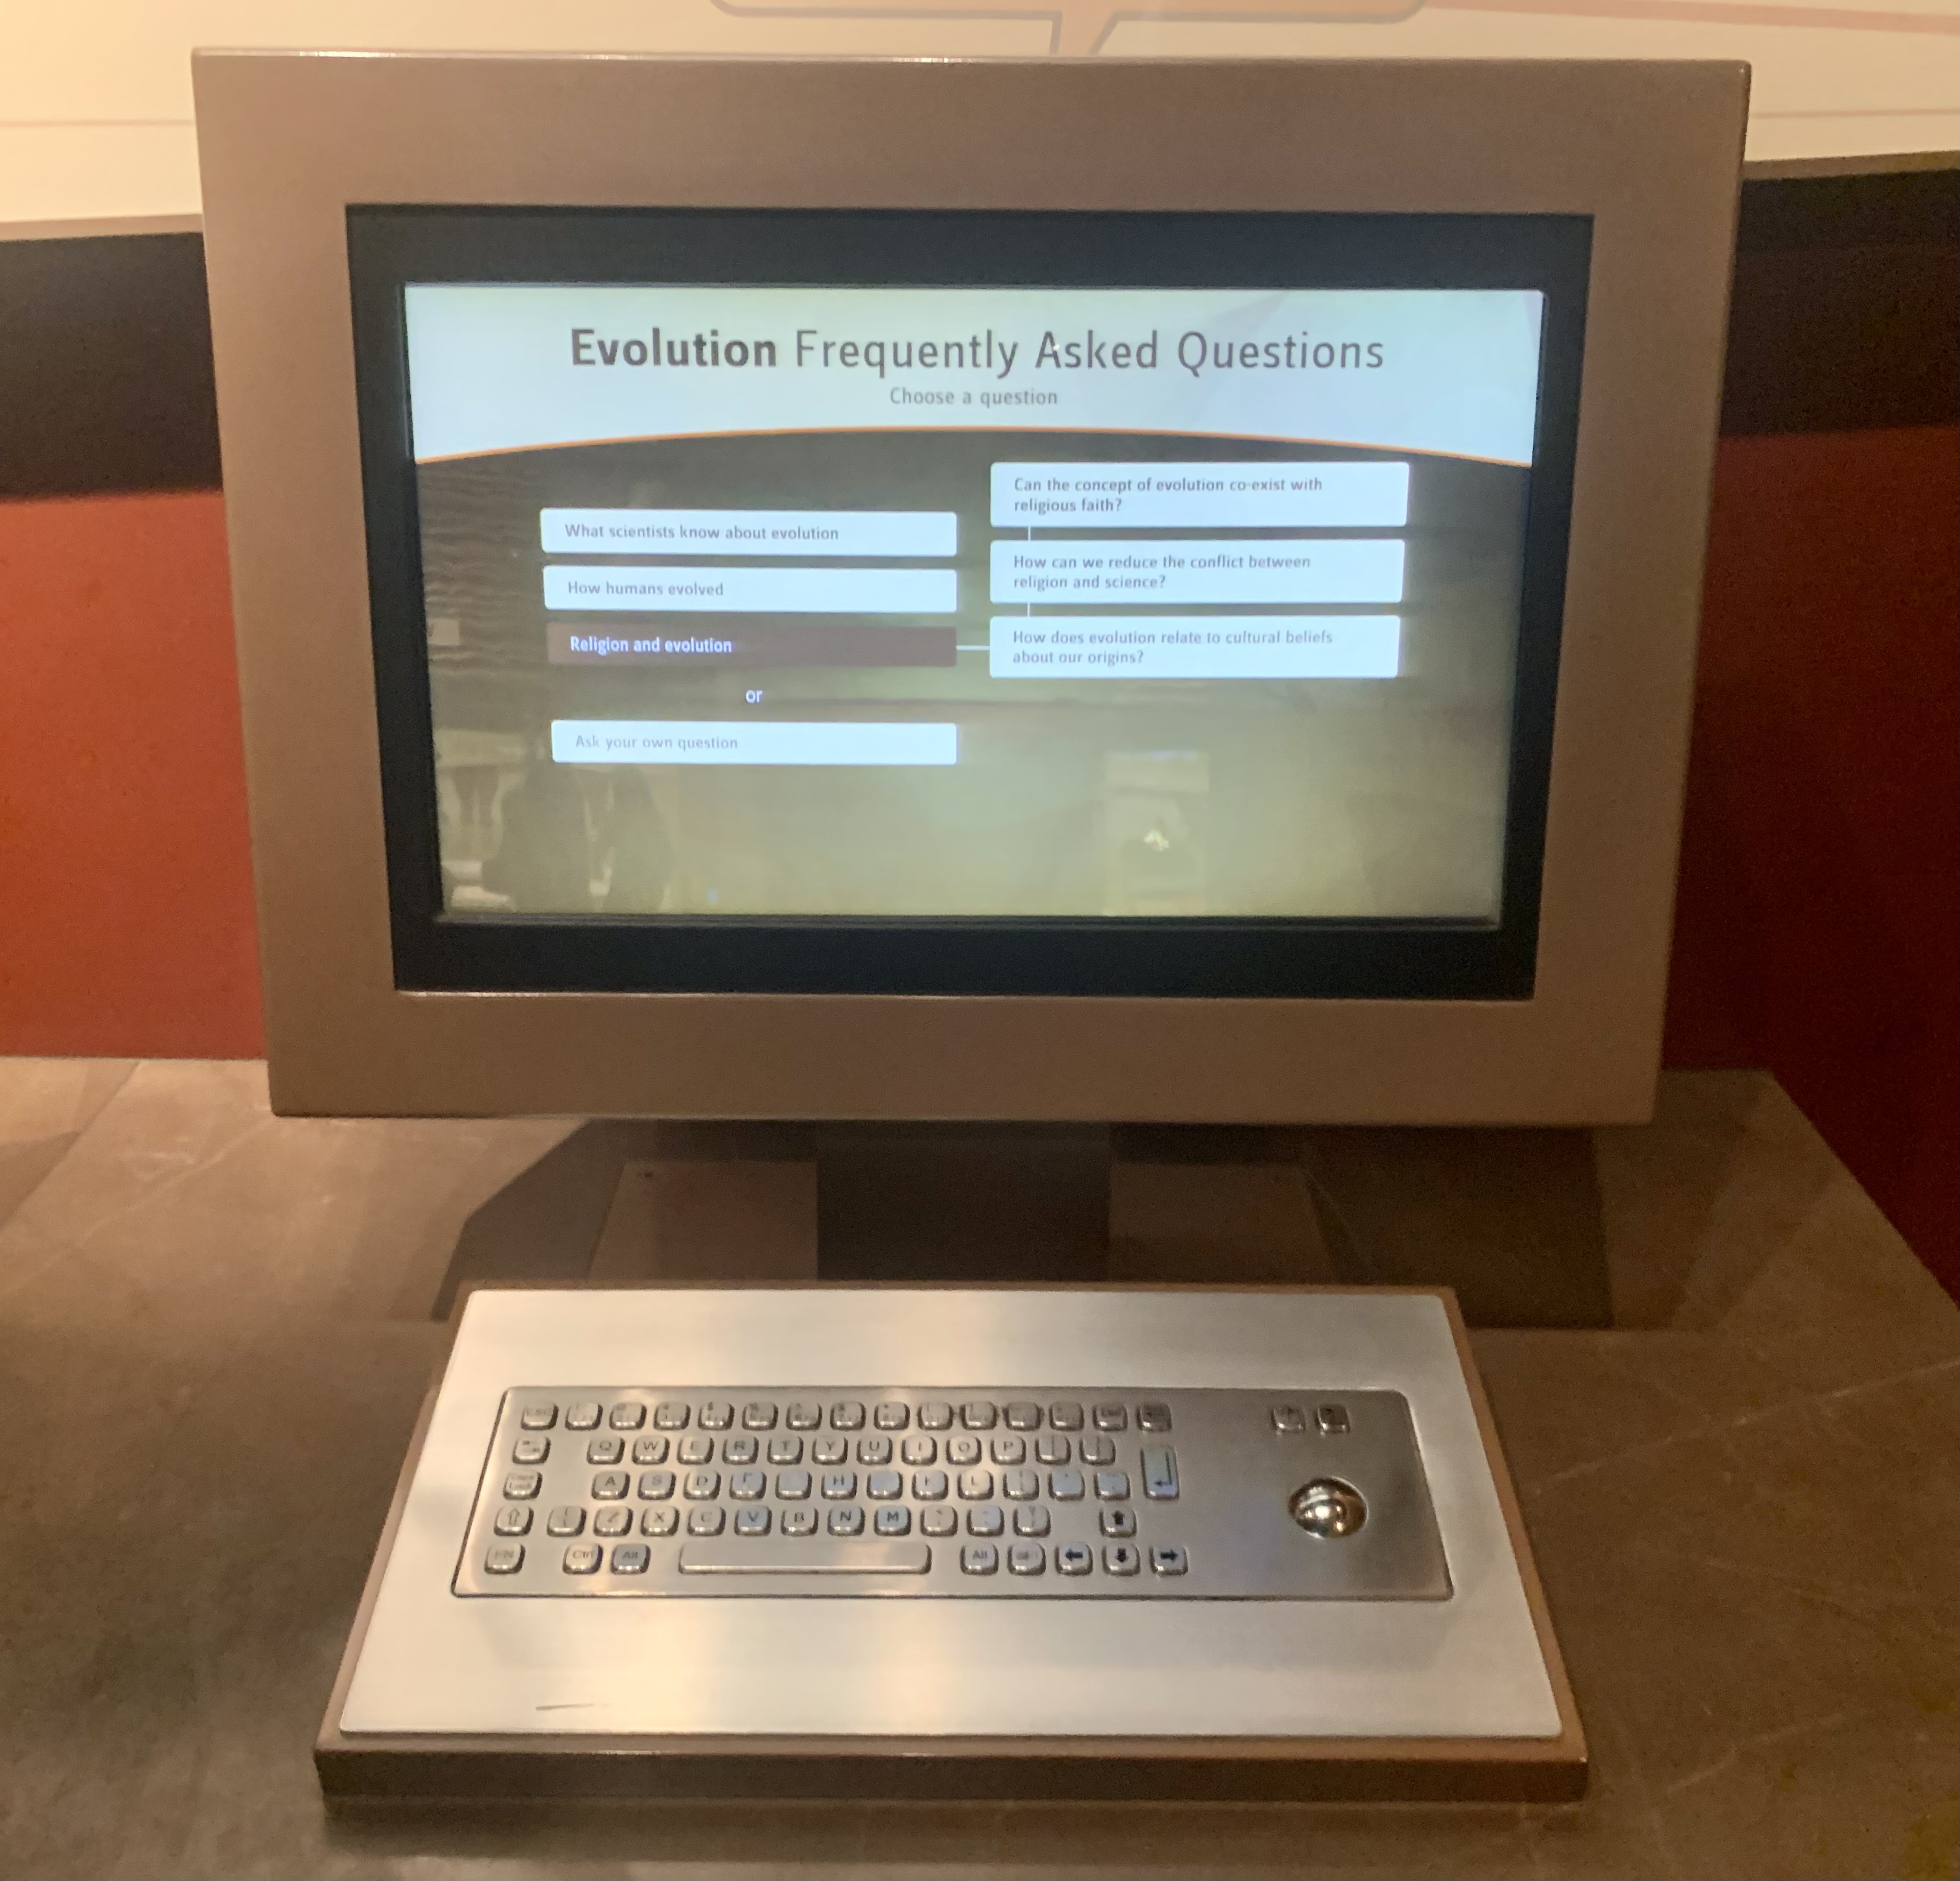 zoomed in picture of the Evolution FAQ computers and the display shows the religion and evolution questions.